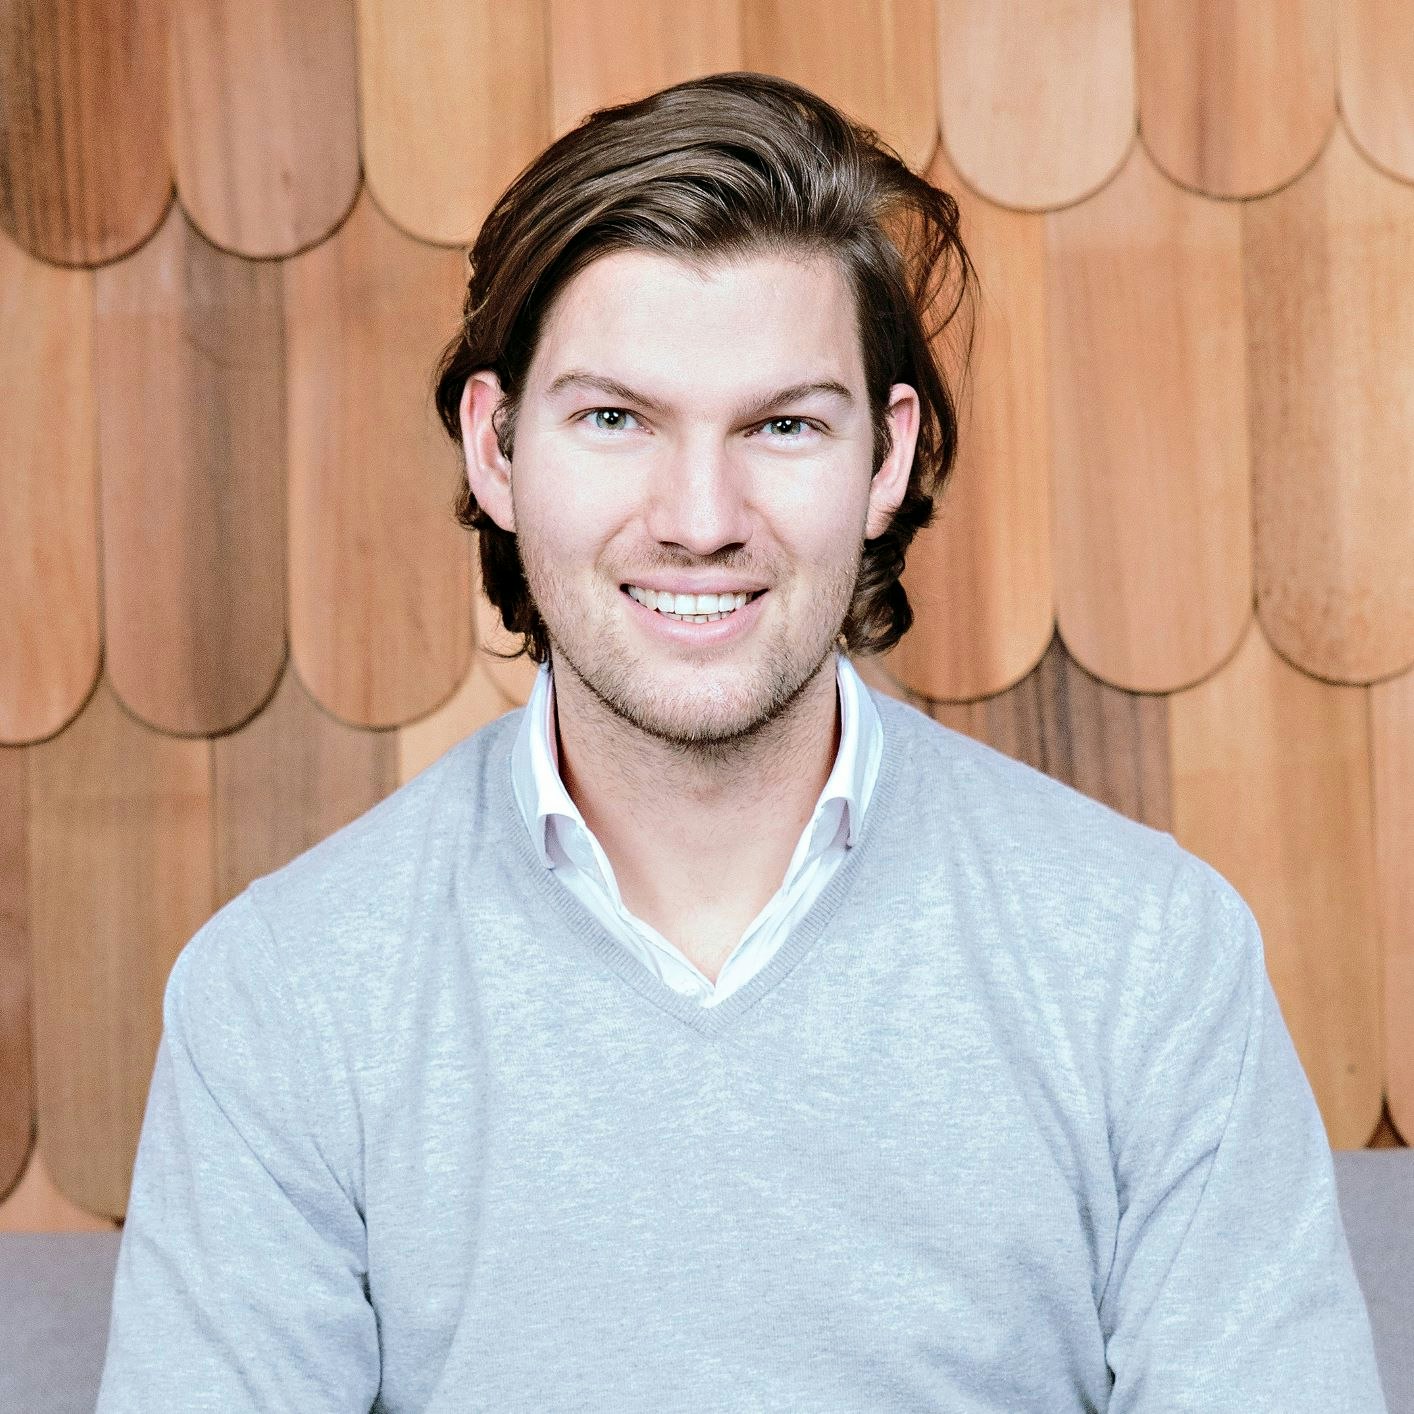 Photo of Valentin Stalf, CEO and cofounder of N26.